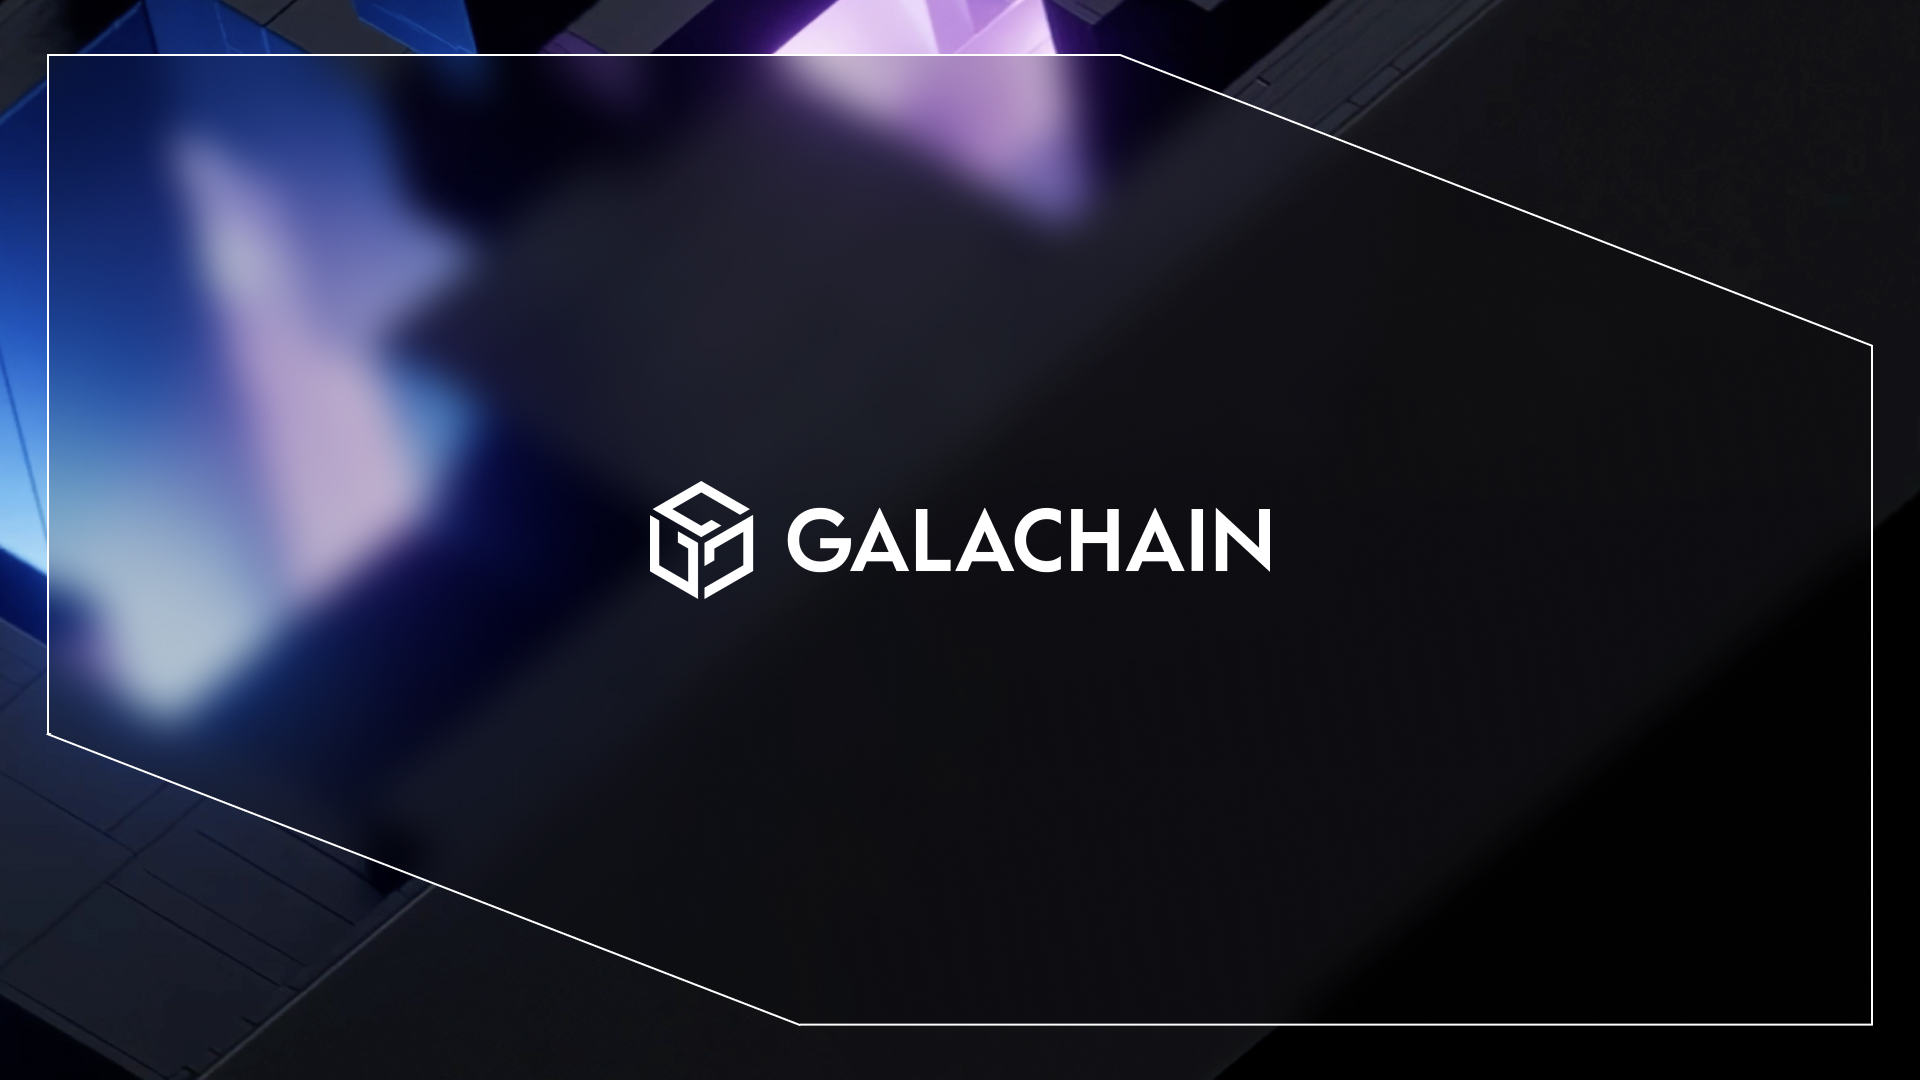 GalaChain is prepared to onboard the masses and empower them with web3 tech.